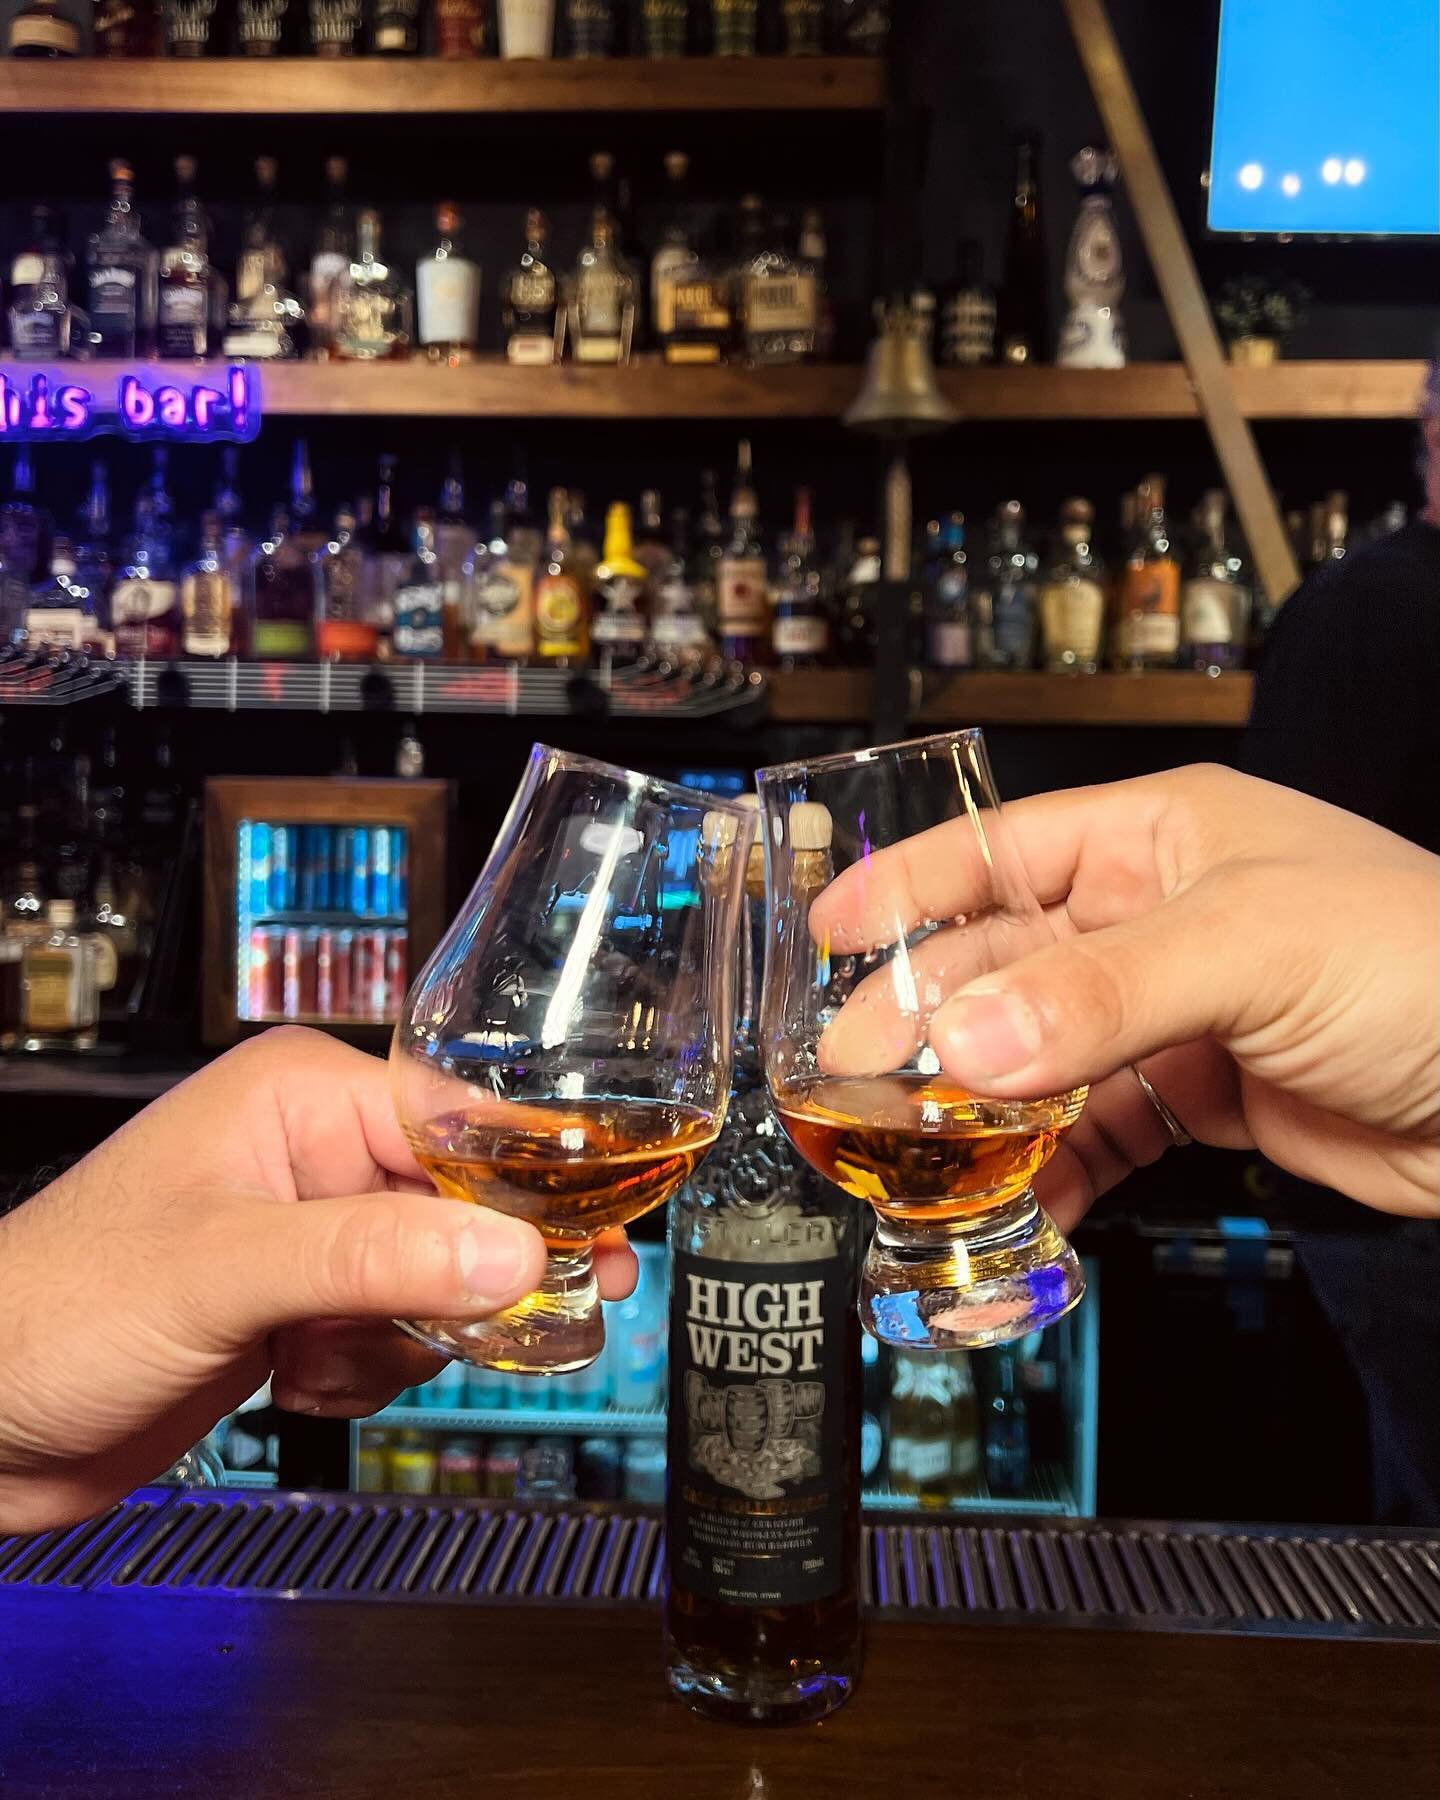 So I whiskey&rsquo;d my way over you 🎶

🥃 Thirsty Thursday: $10 whiskey pours and $9 espresso martinis 

🥃 Join our Whiskey Club! More info on our website &mdash; westwoodworld.com 

🪩 Line dancing lessons tonight at 9pm 

👢 First Friday of the 